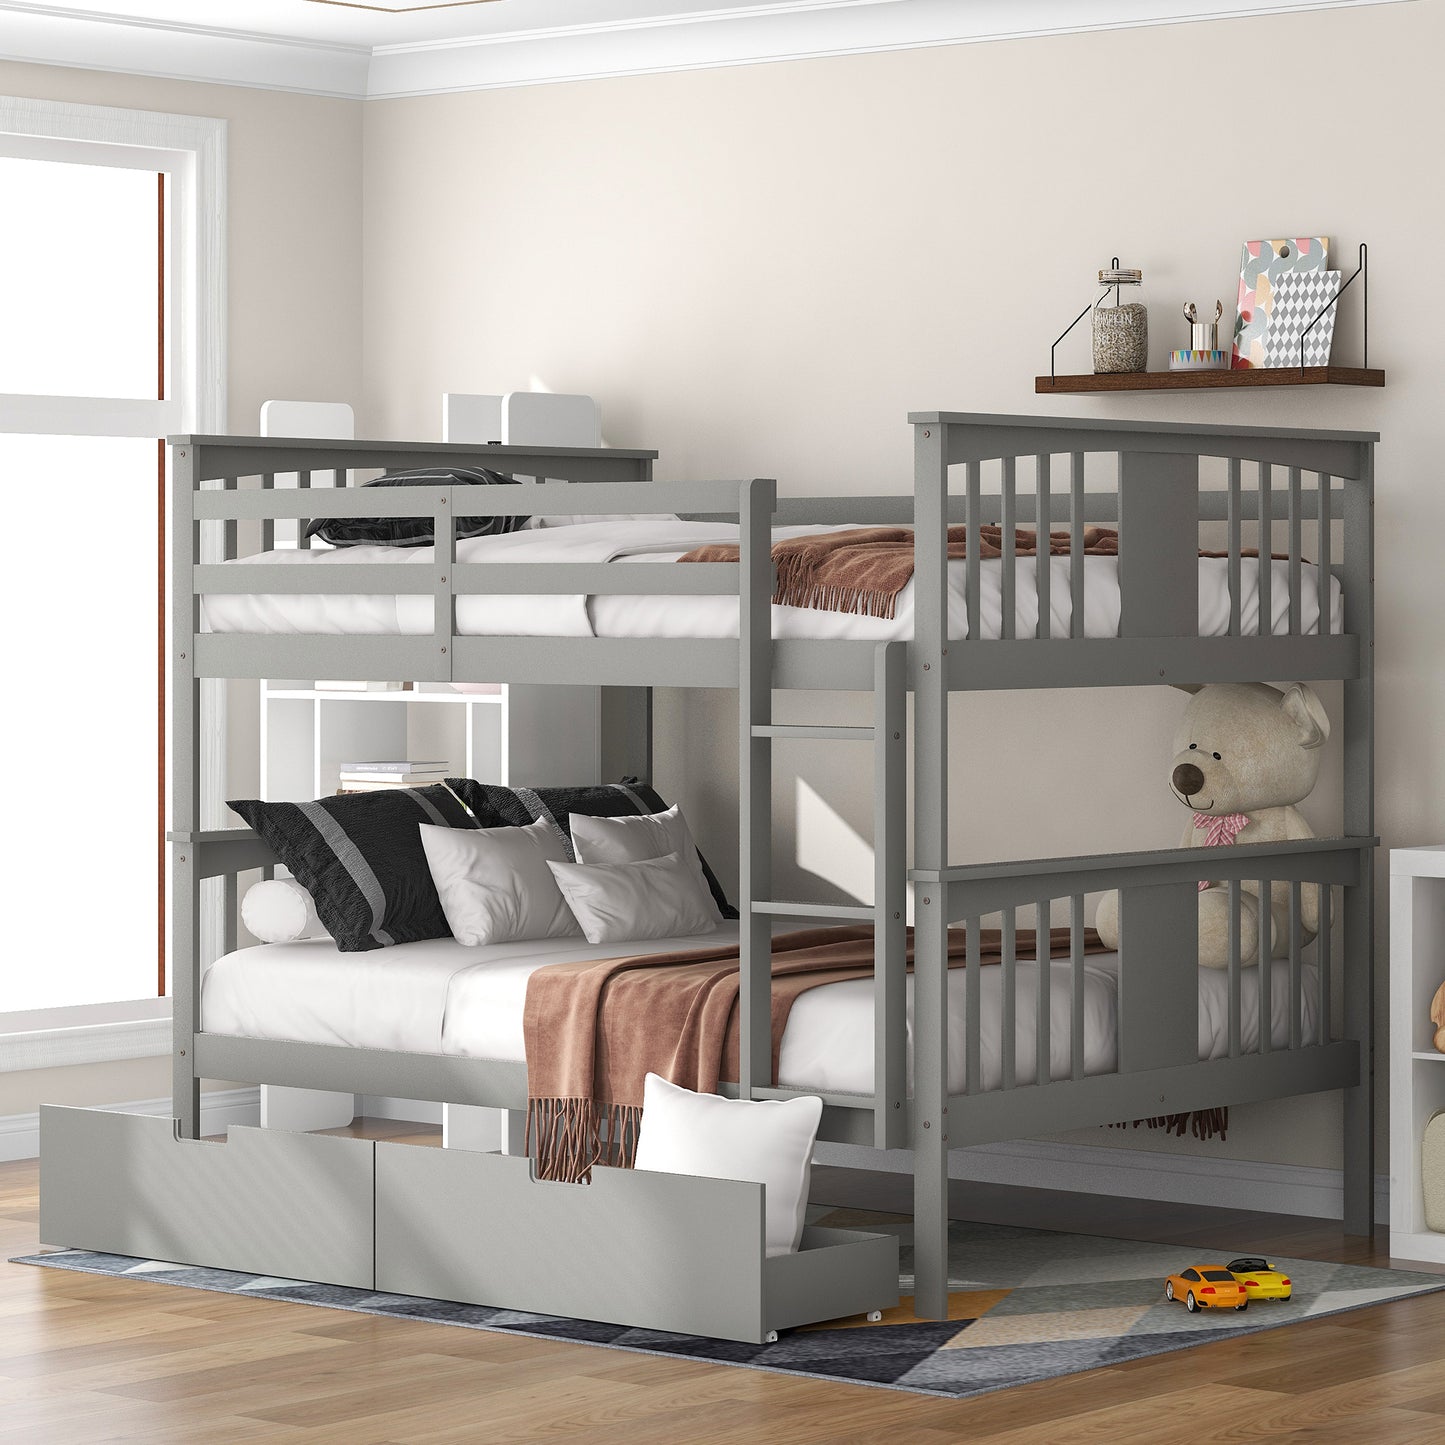 Full over Full Bunk Bed with Drawers and Ladder for Bedroom, Guest Room Furniture-Gray